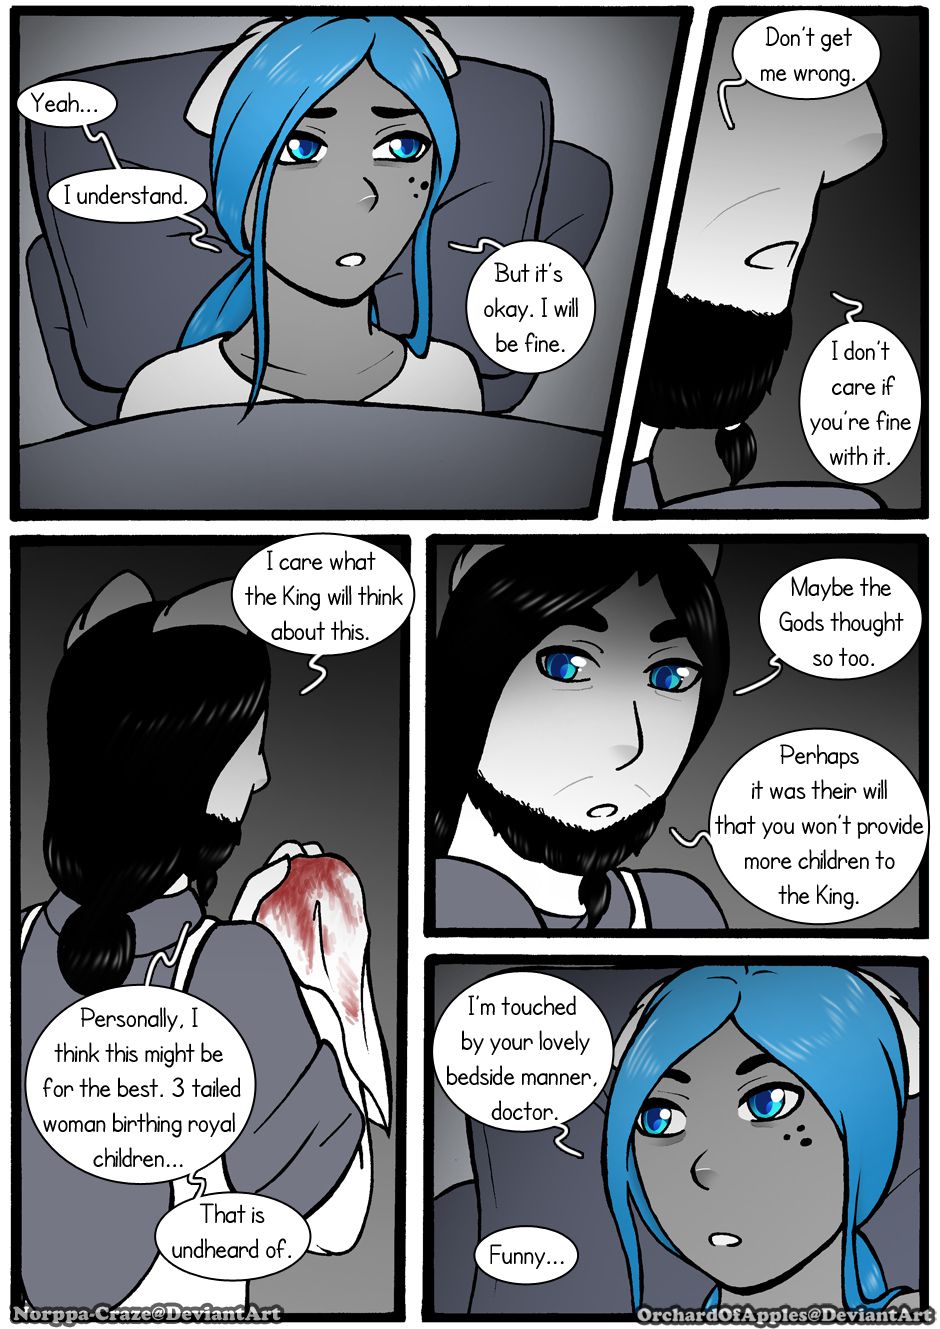 [Jeny-jen94] Between Kings and Queens [Ongoing] 331